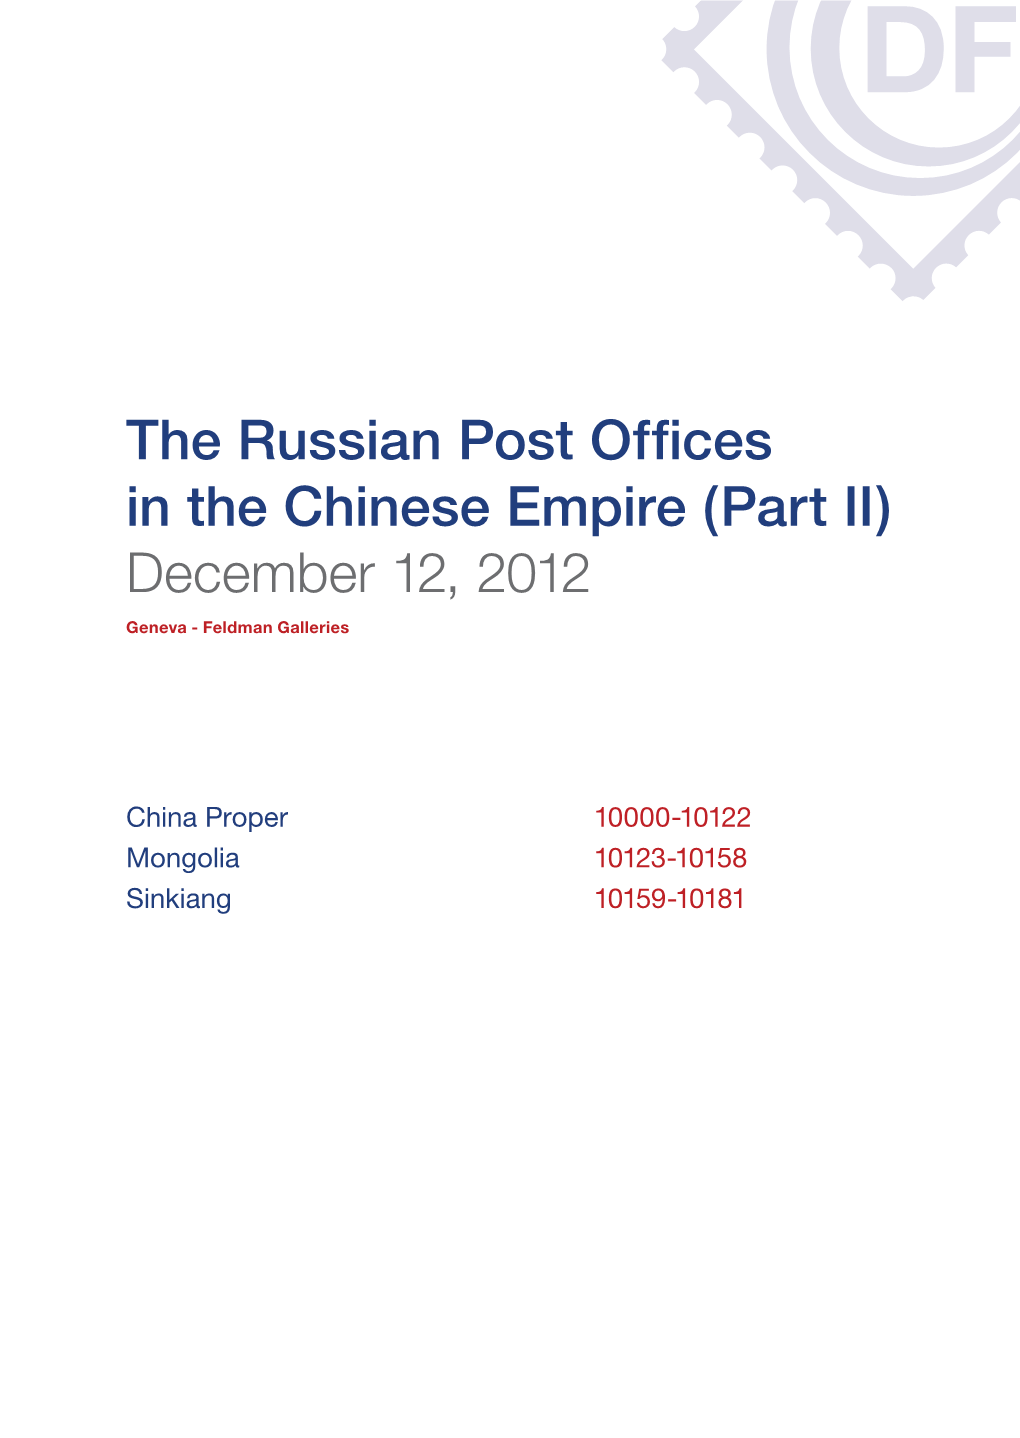 The Russian Post Offices in the Chinese Empire (Part II) December 12, 2012 Geneva - Feldman Galleries